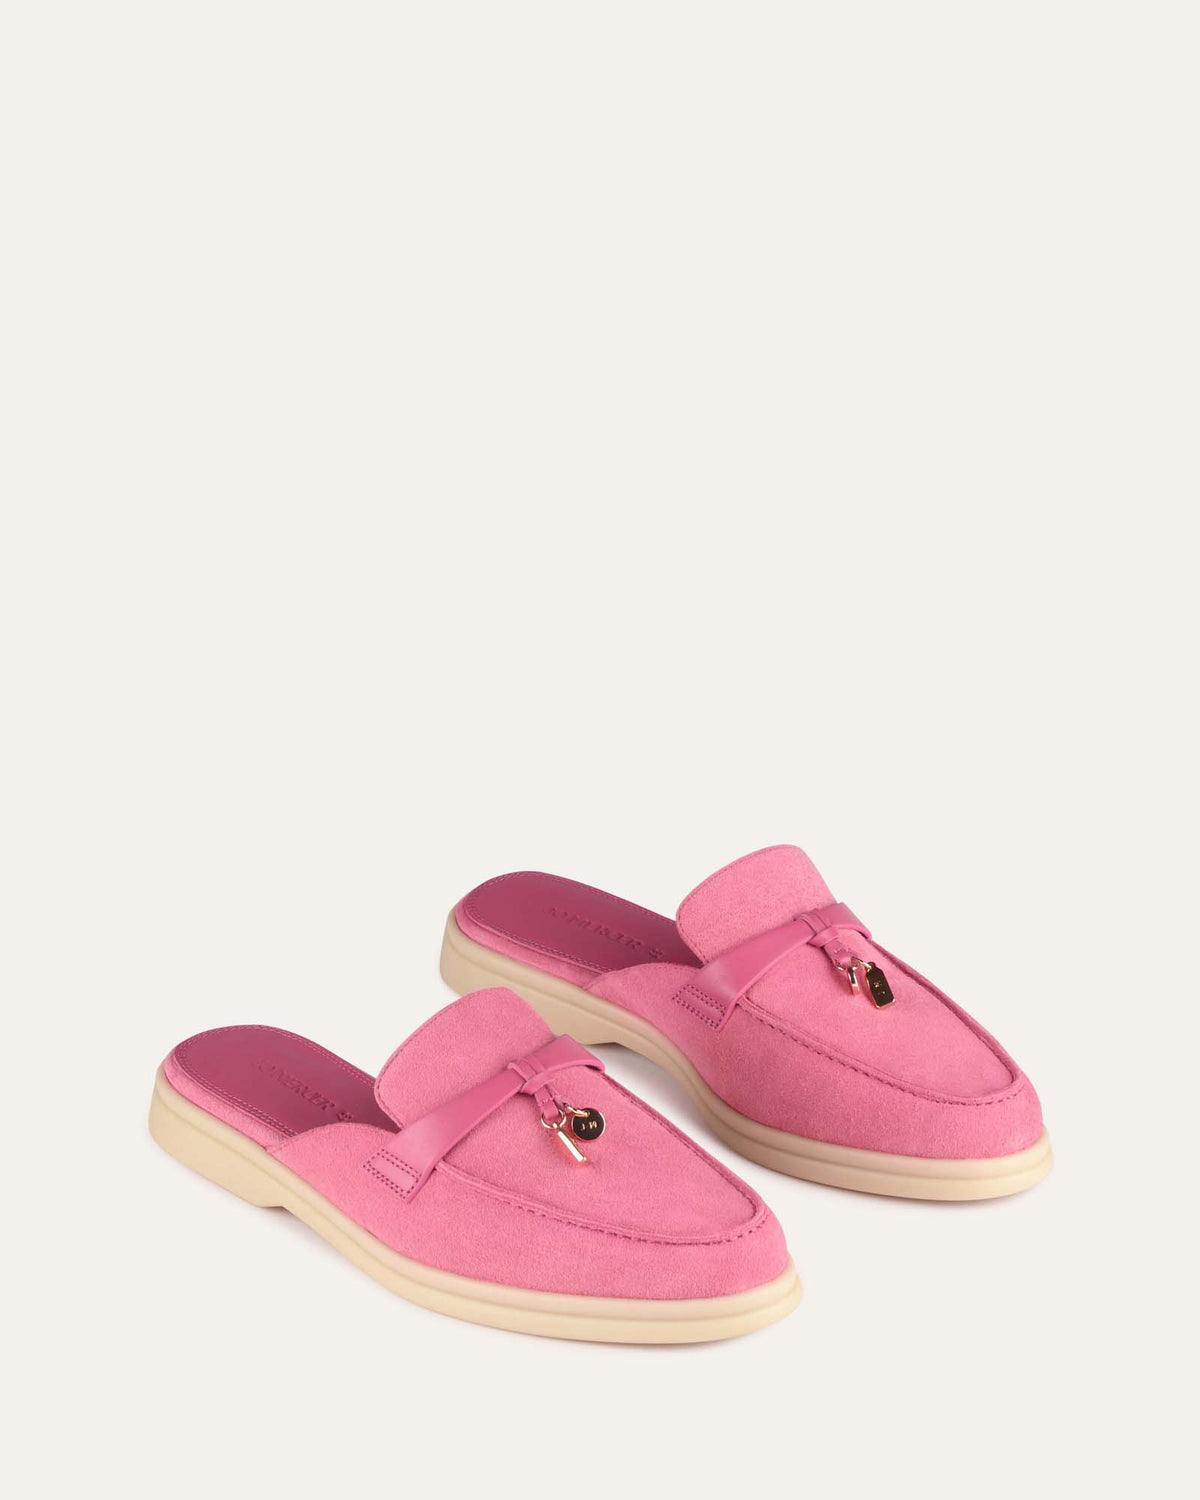 CAMBRIDGE LOAFERS PINK SUEDE